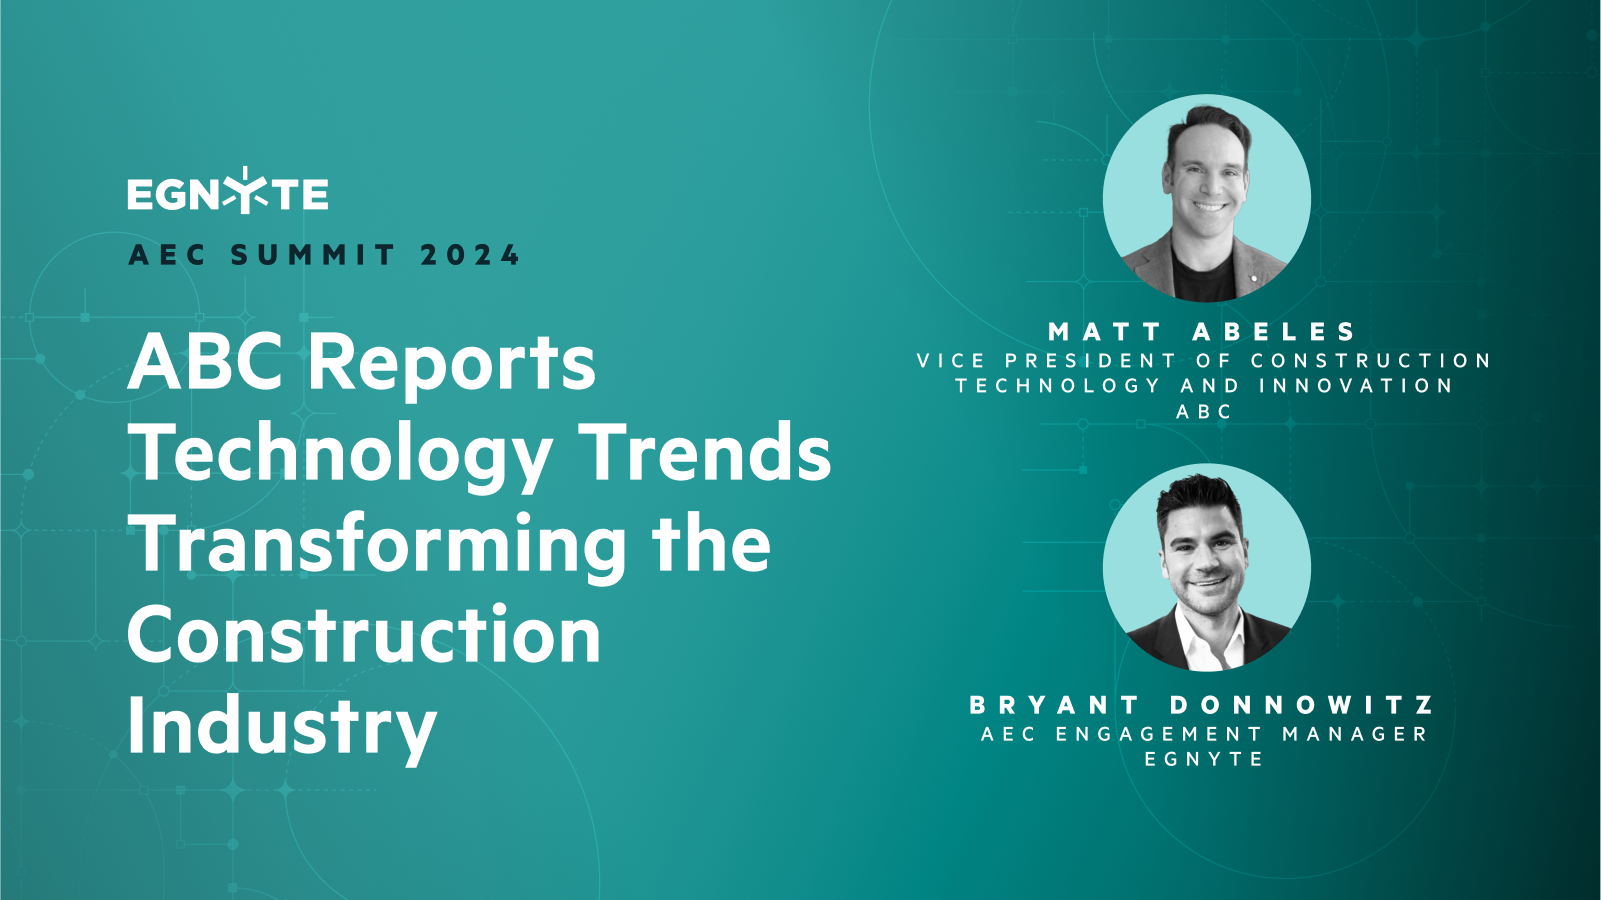 ABC Reports Technology Trends Transforming the Construction Industry